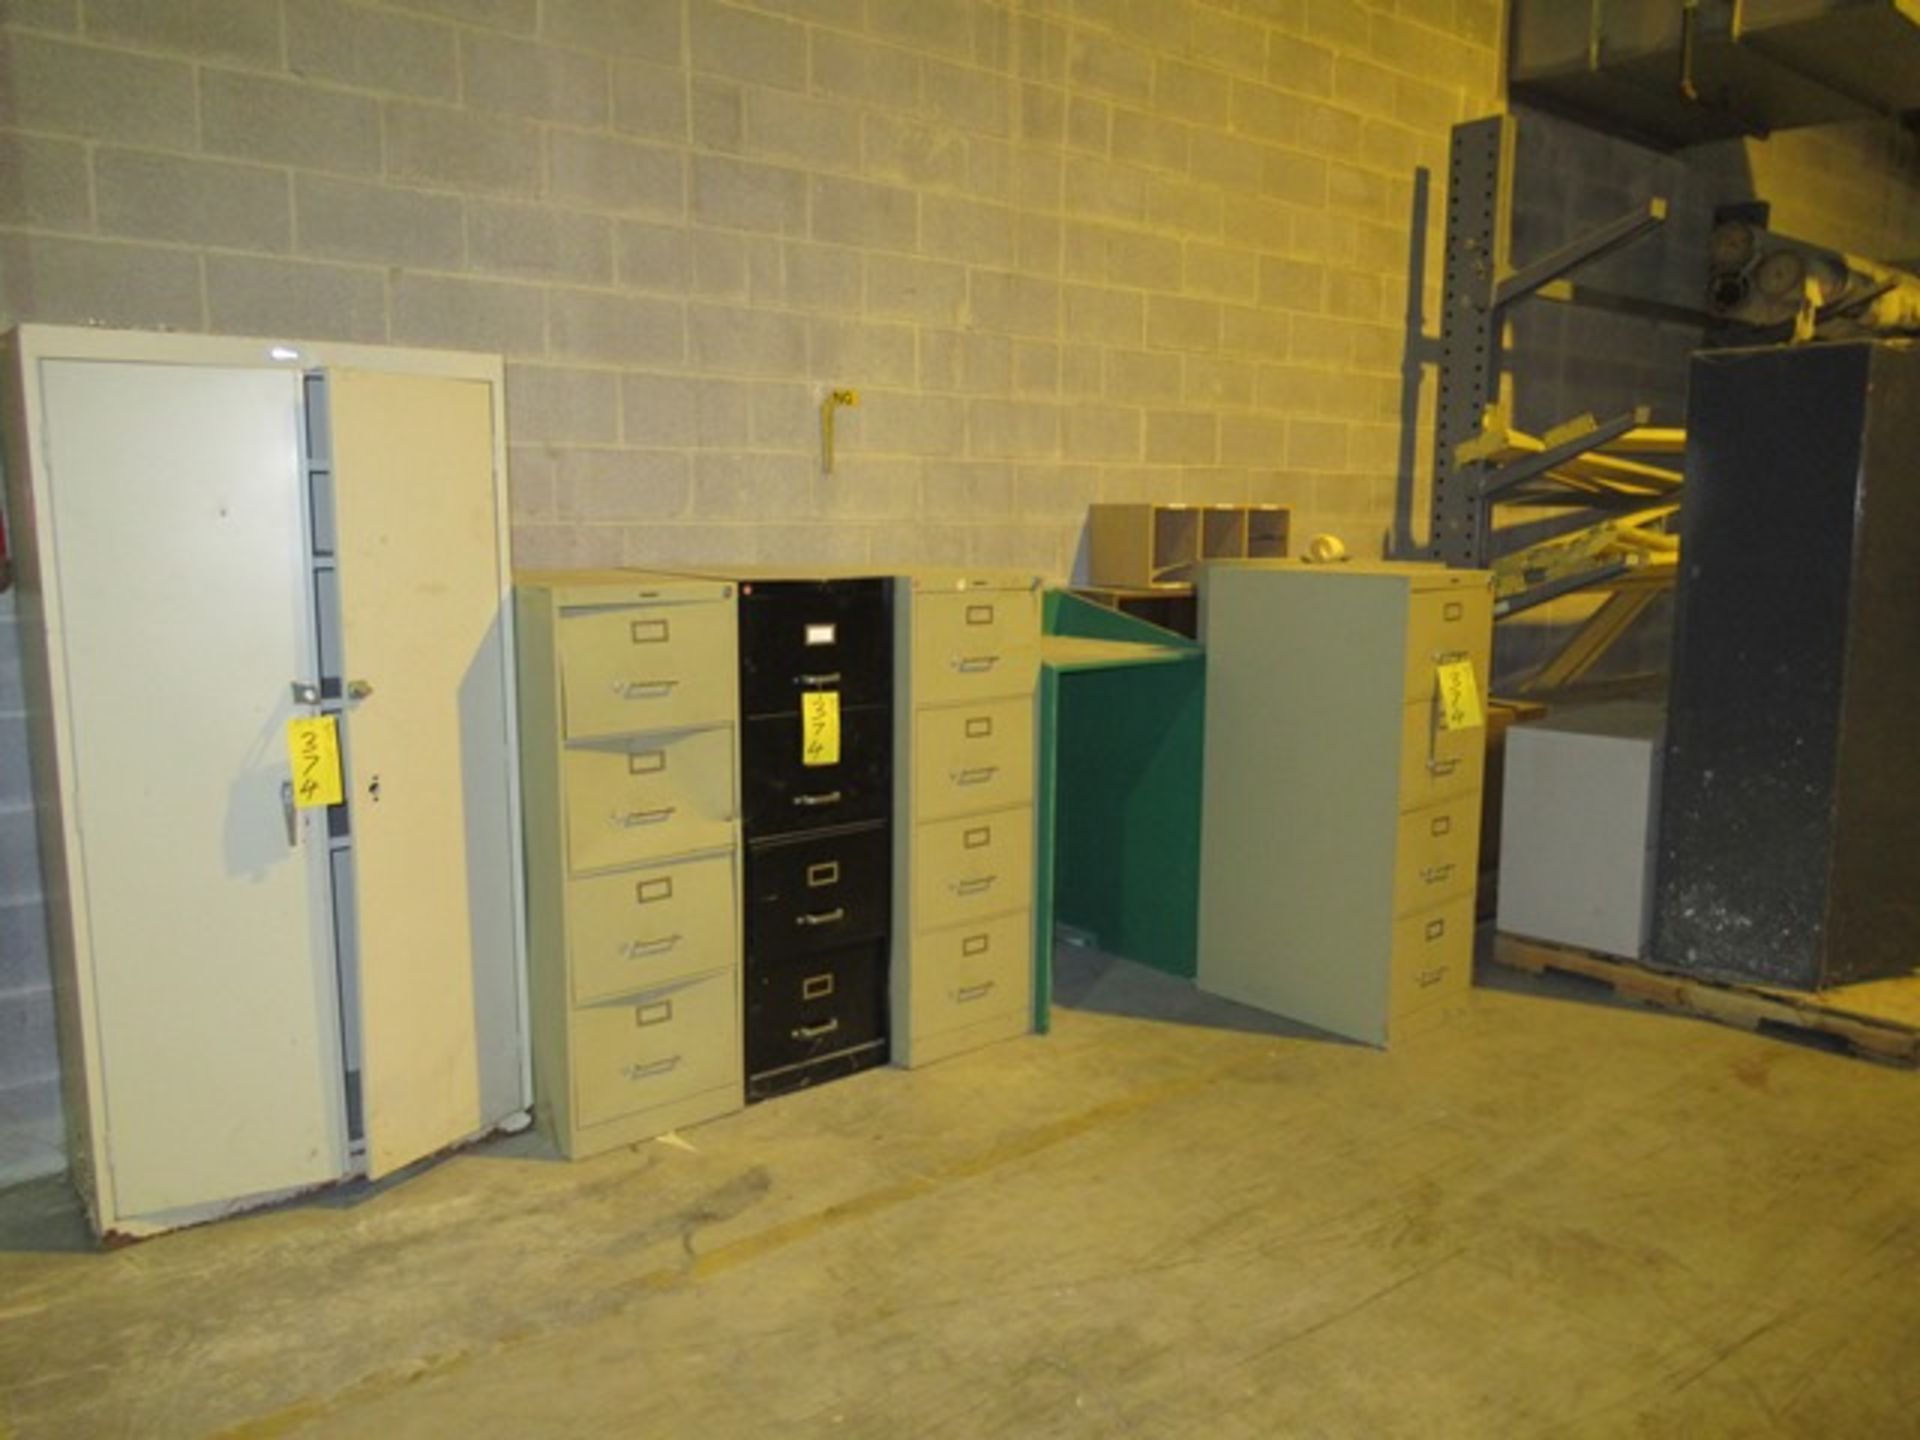 LOT ASST. 2 DR. SUPPLY CABINETS, 4 DR. FILE CABINETS, ETC. (S1STFBB)